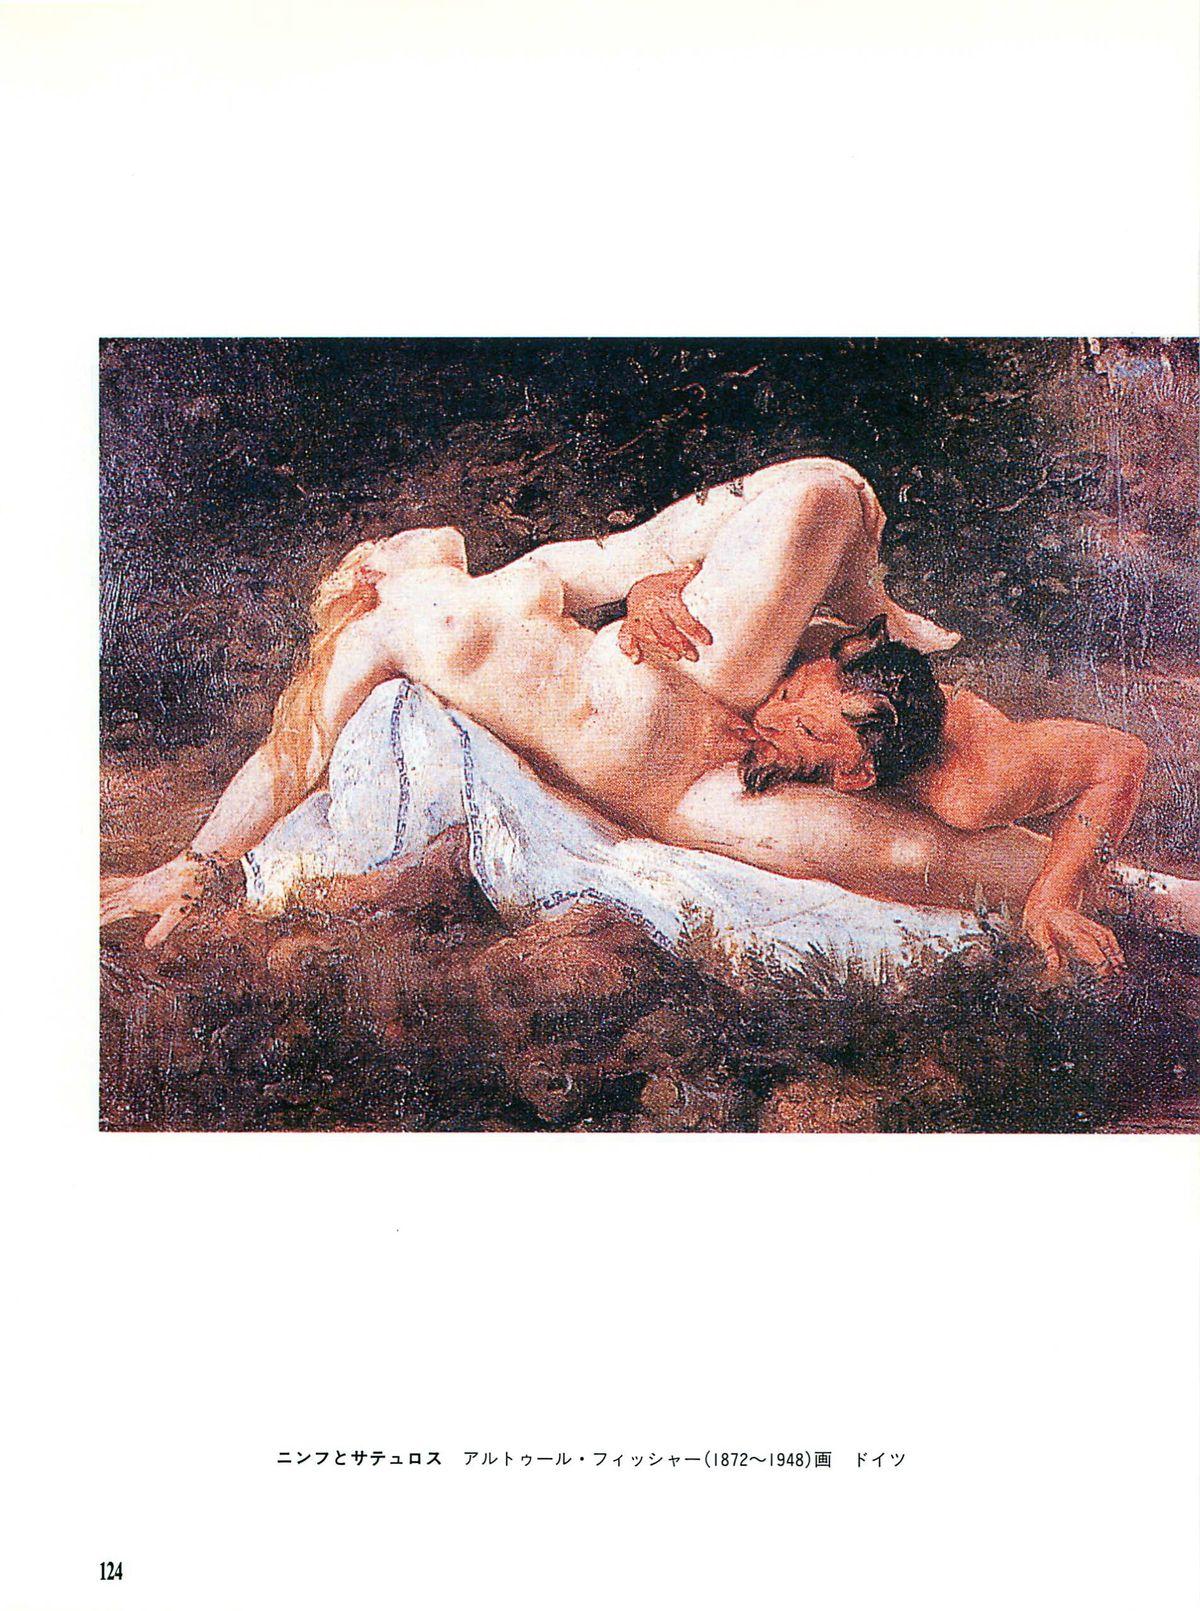 World of Eros: Erotic pieces of the masters 127